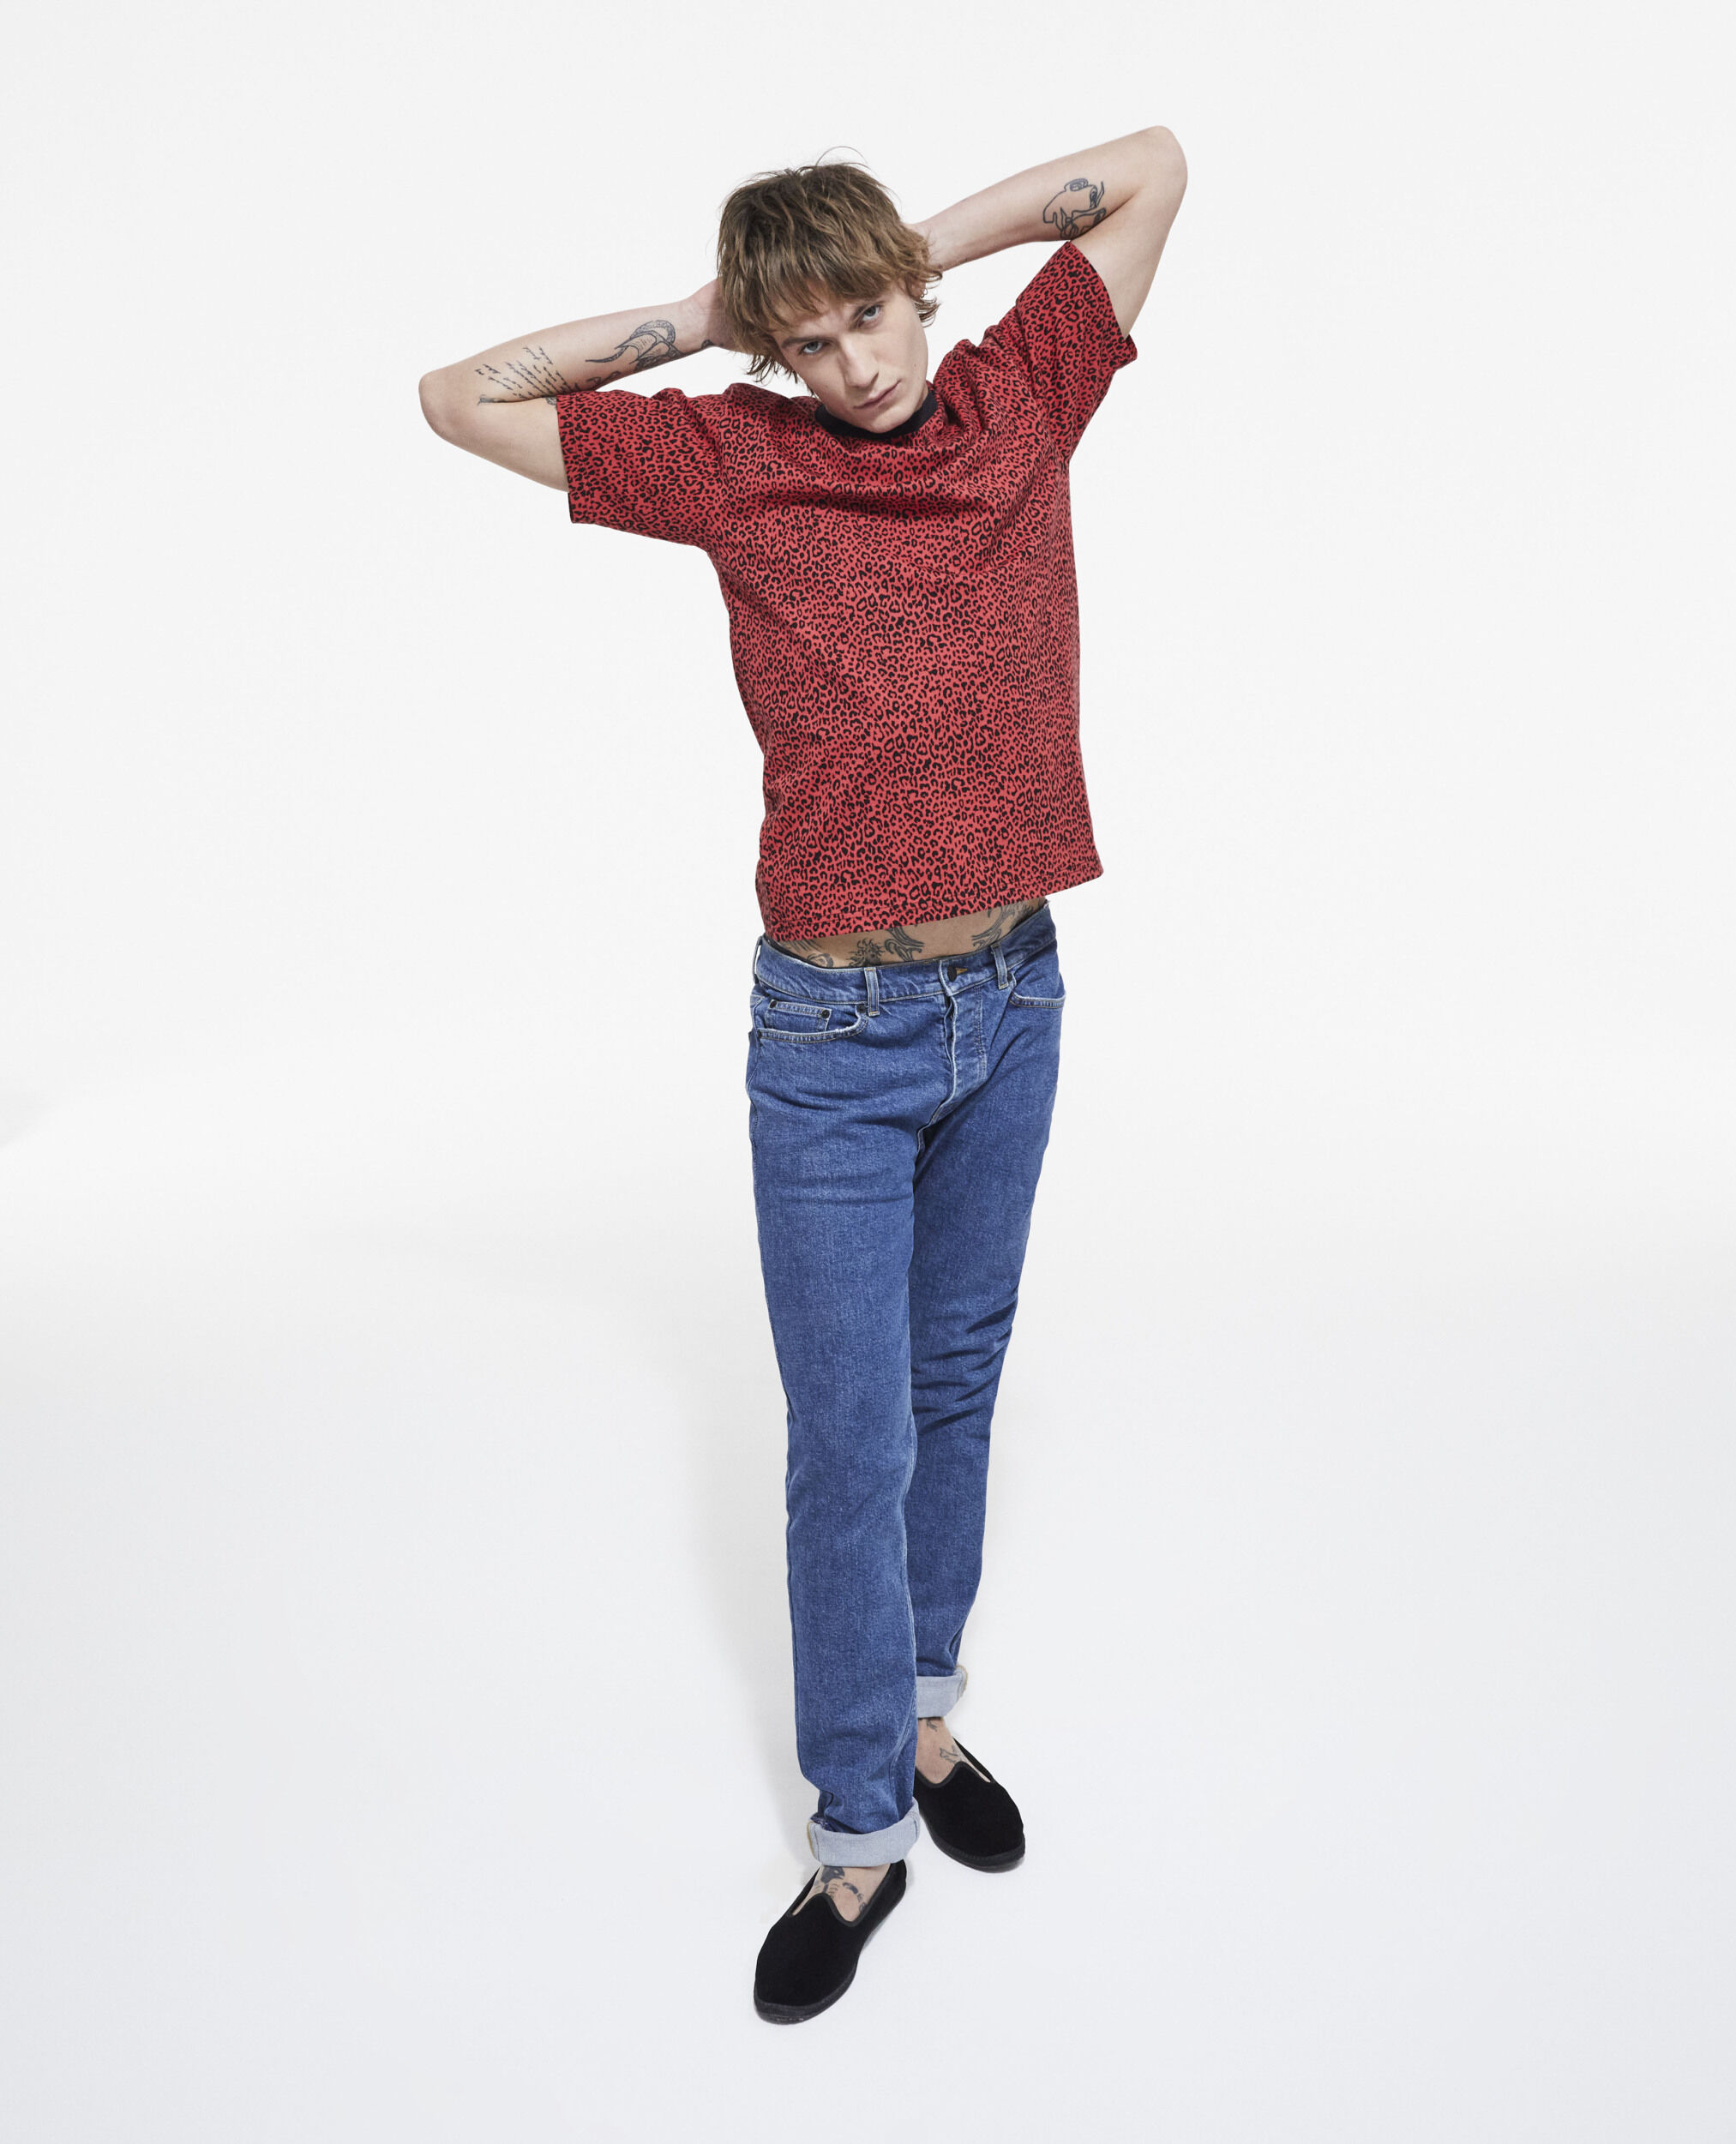 Red leopard print T-shirt, DARK RED, hi-res image number null